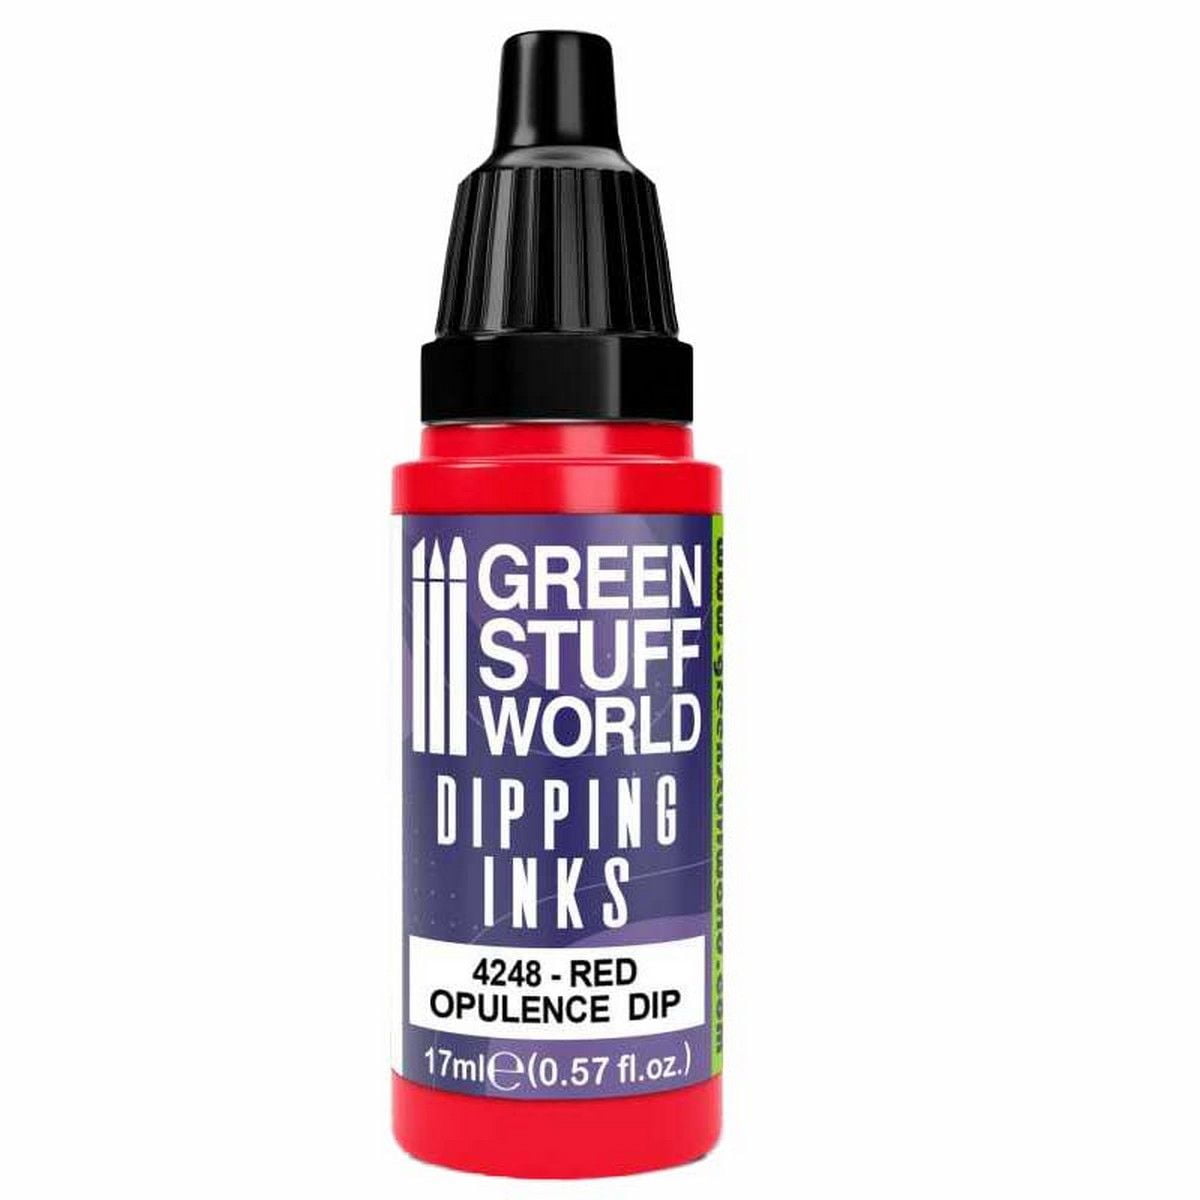 Dipping Ink 17ml - Red Opulence Dip